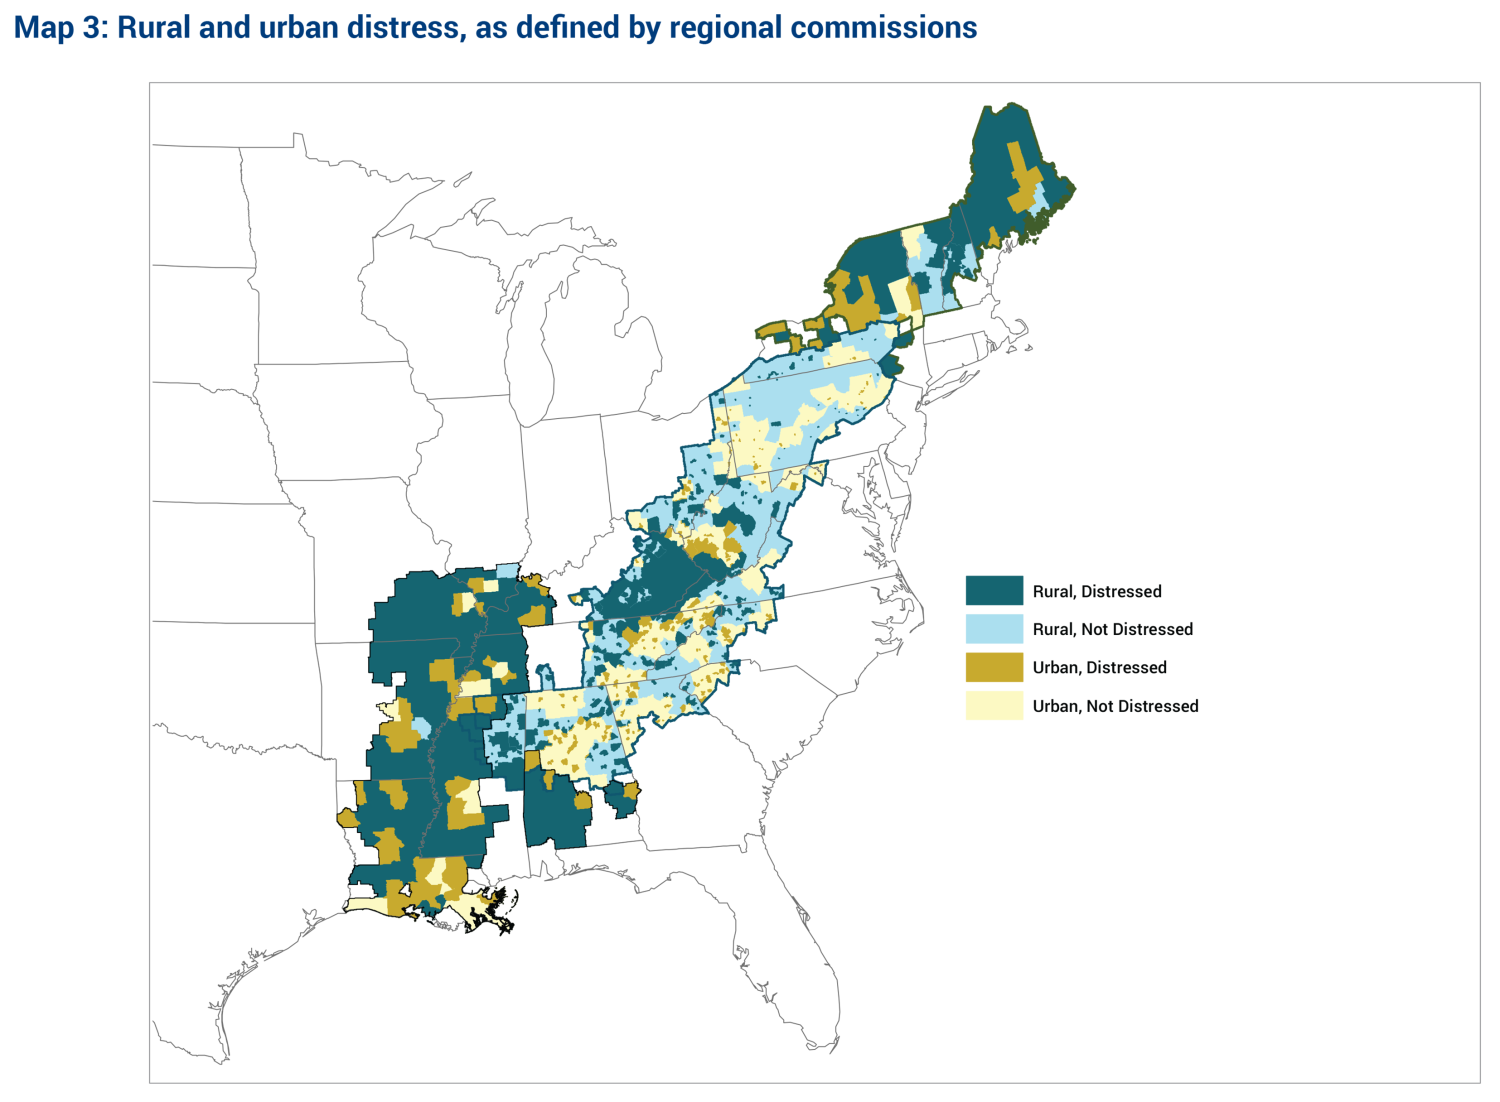 Rural and urban distress, as defined by regional commissions